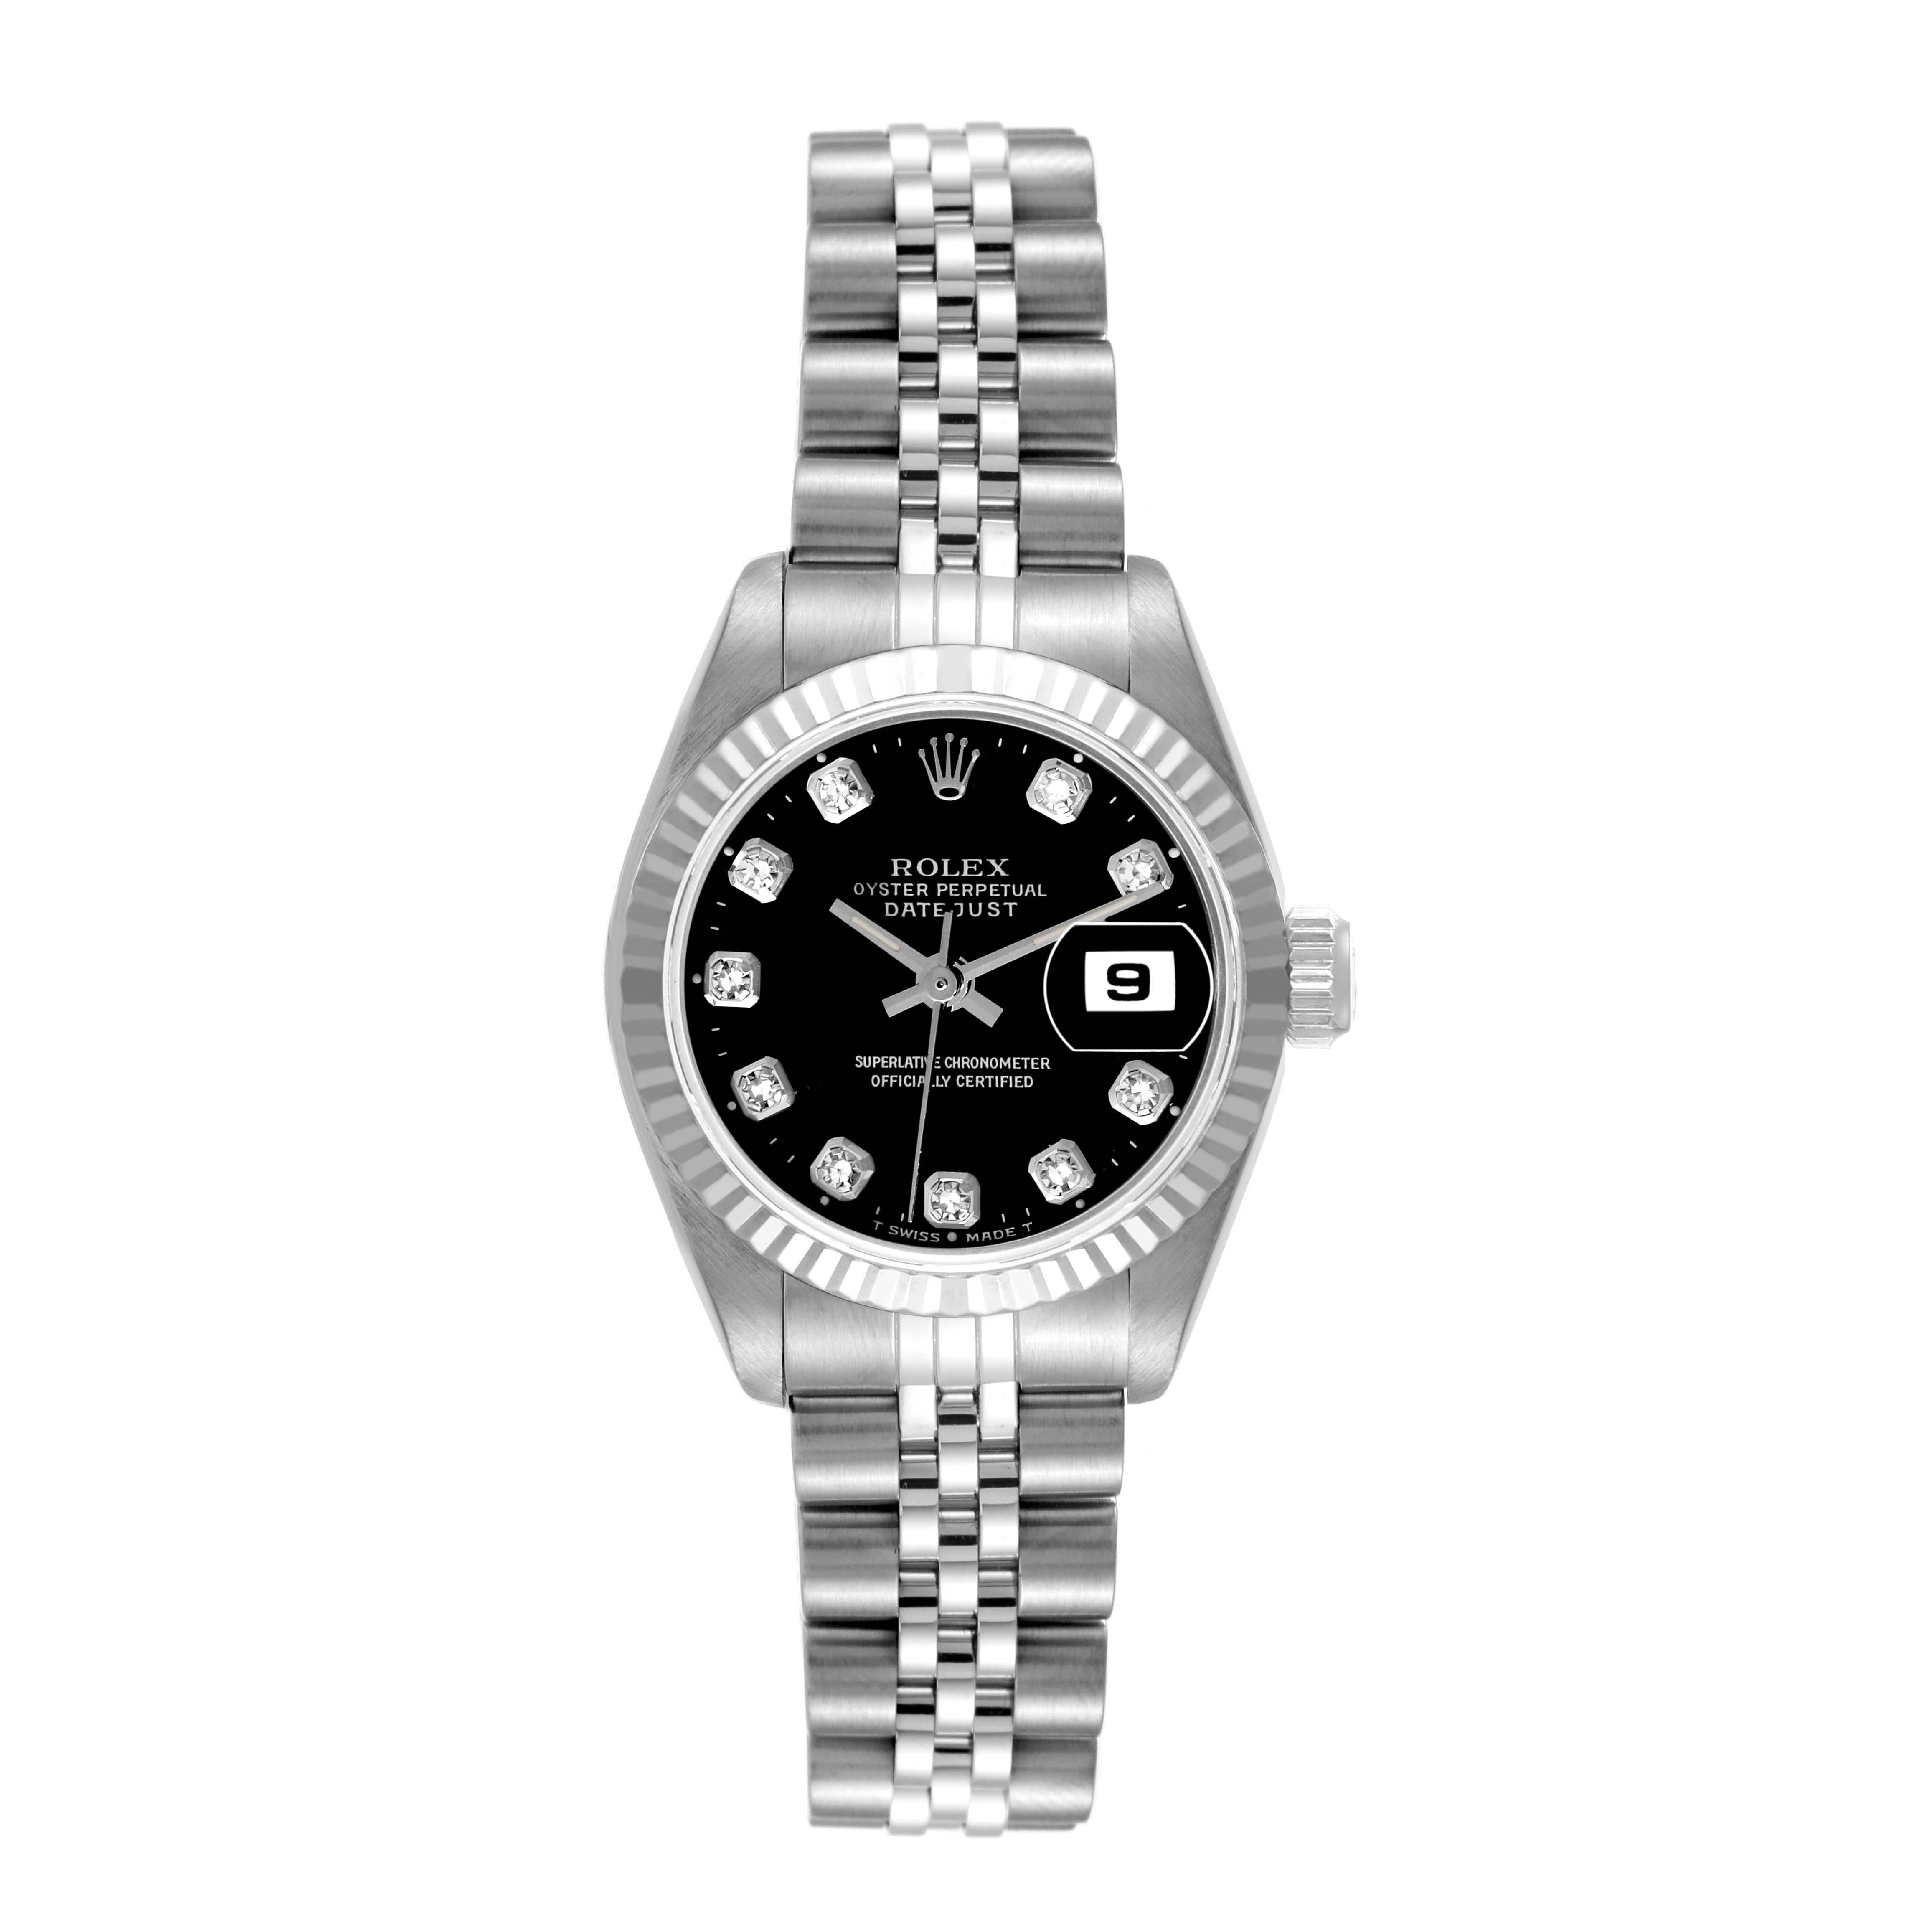 Rolex Datejust Steel White Gold Black Diamond Dial Ladies Watch 69174. Officially certified chronometer automatic self-winding movement. Stainless steel oyster case 26.0 mm in diameter. Rolex logo on a crown. 18k white gold fluted bezel. Scratch